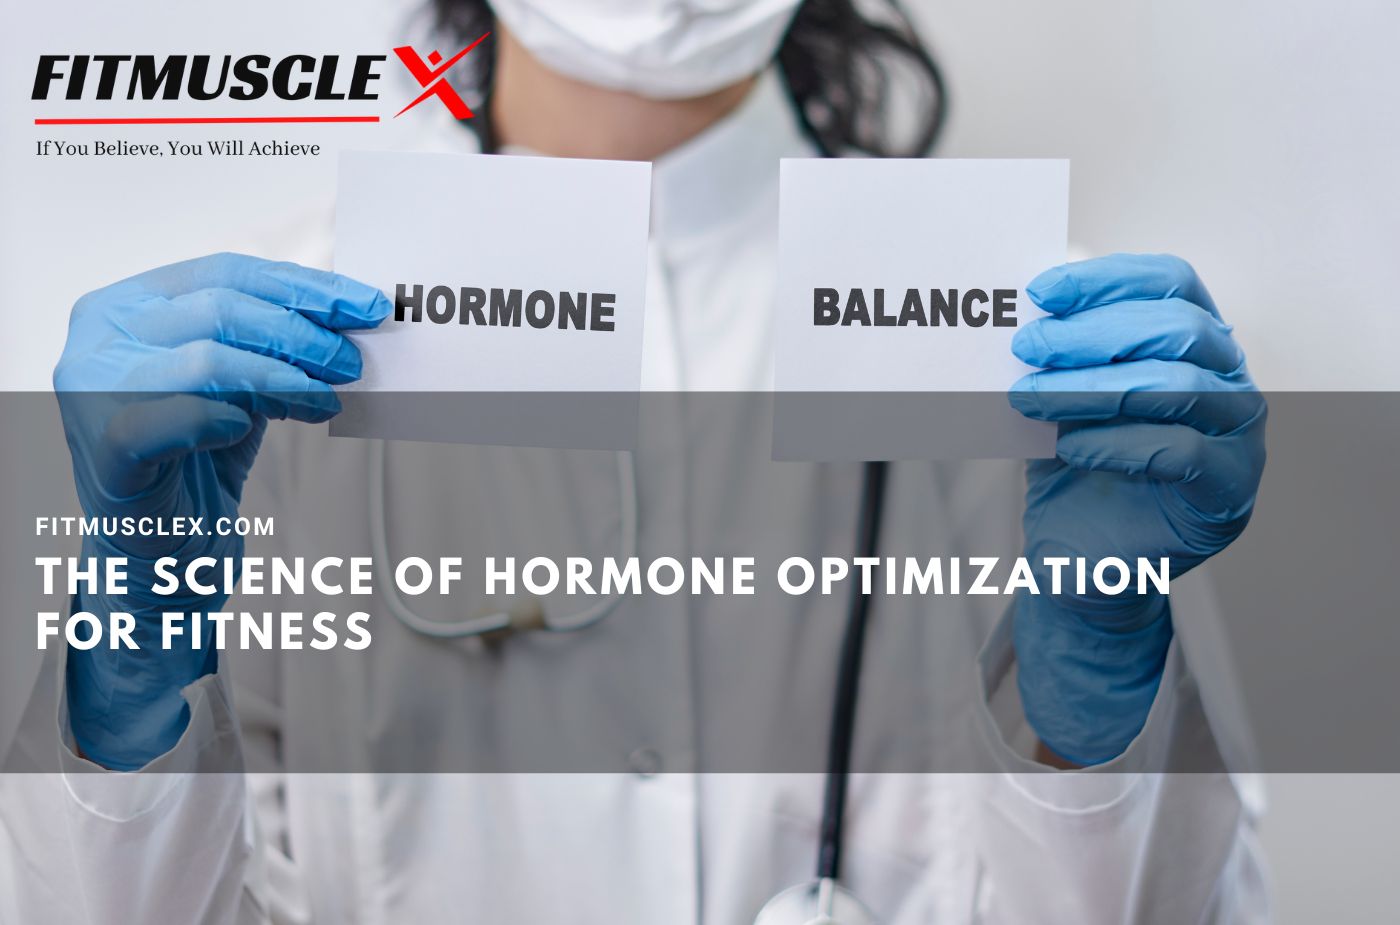 The Science of Hormone Optimization for Fitness